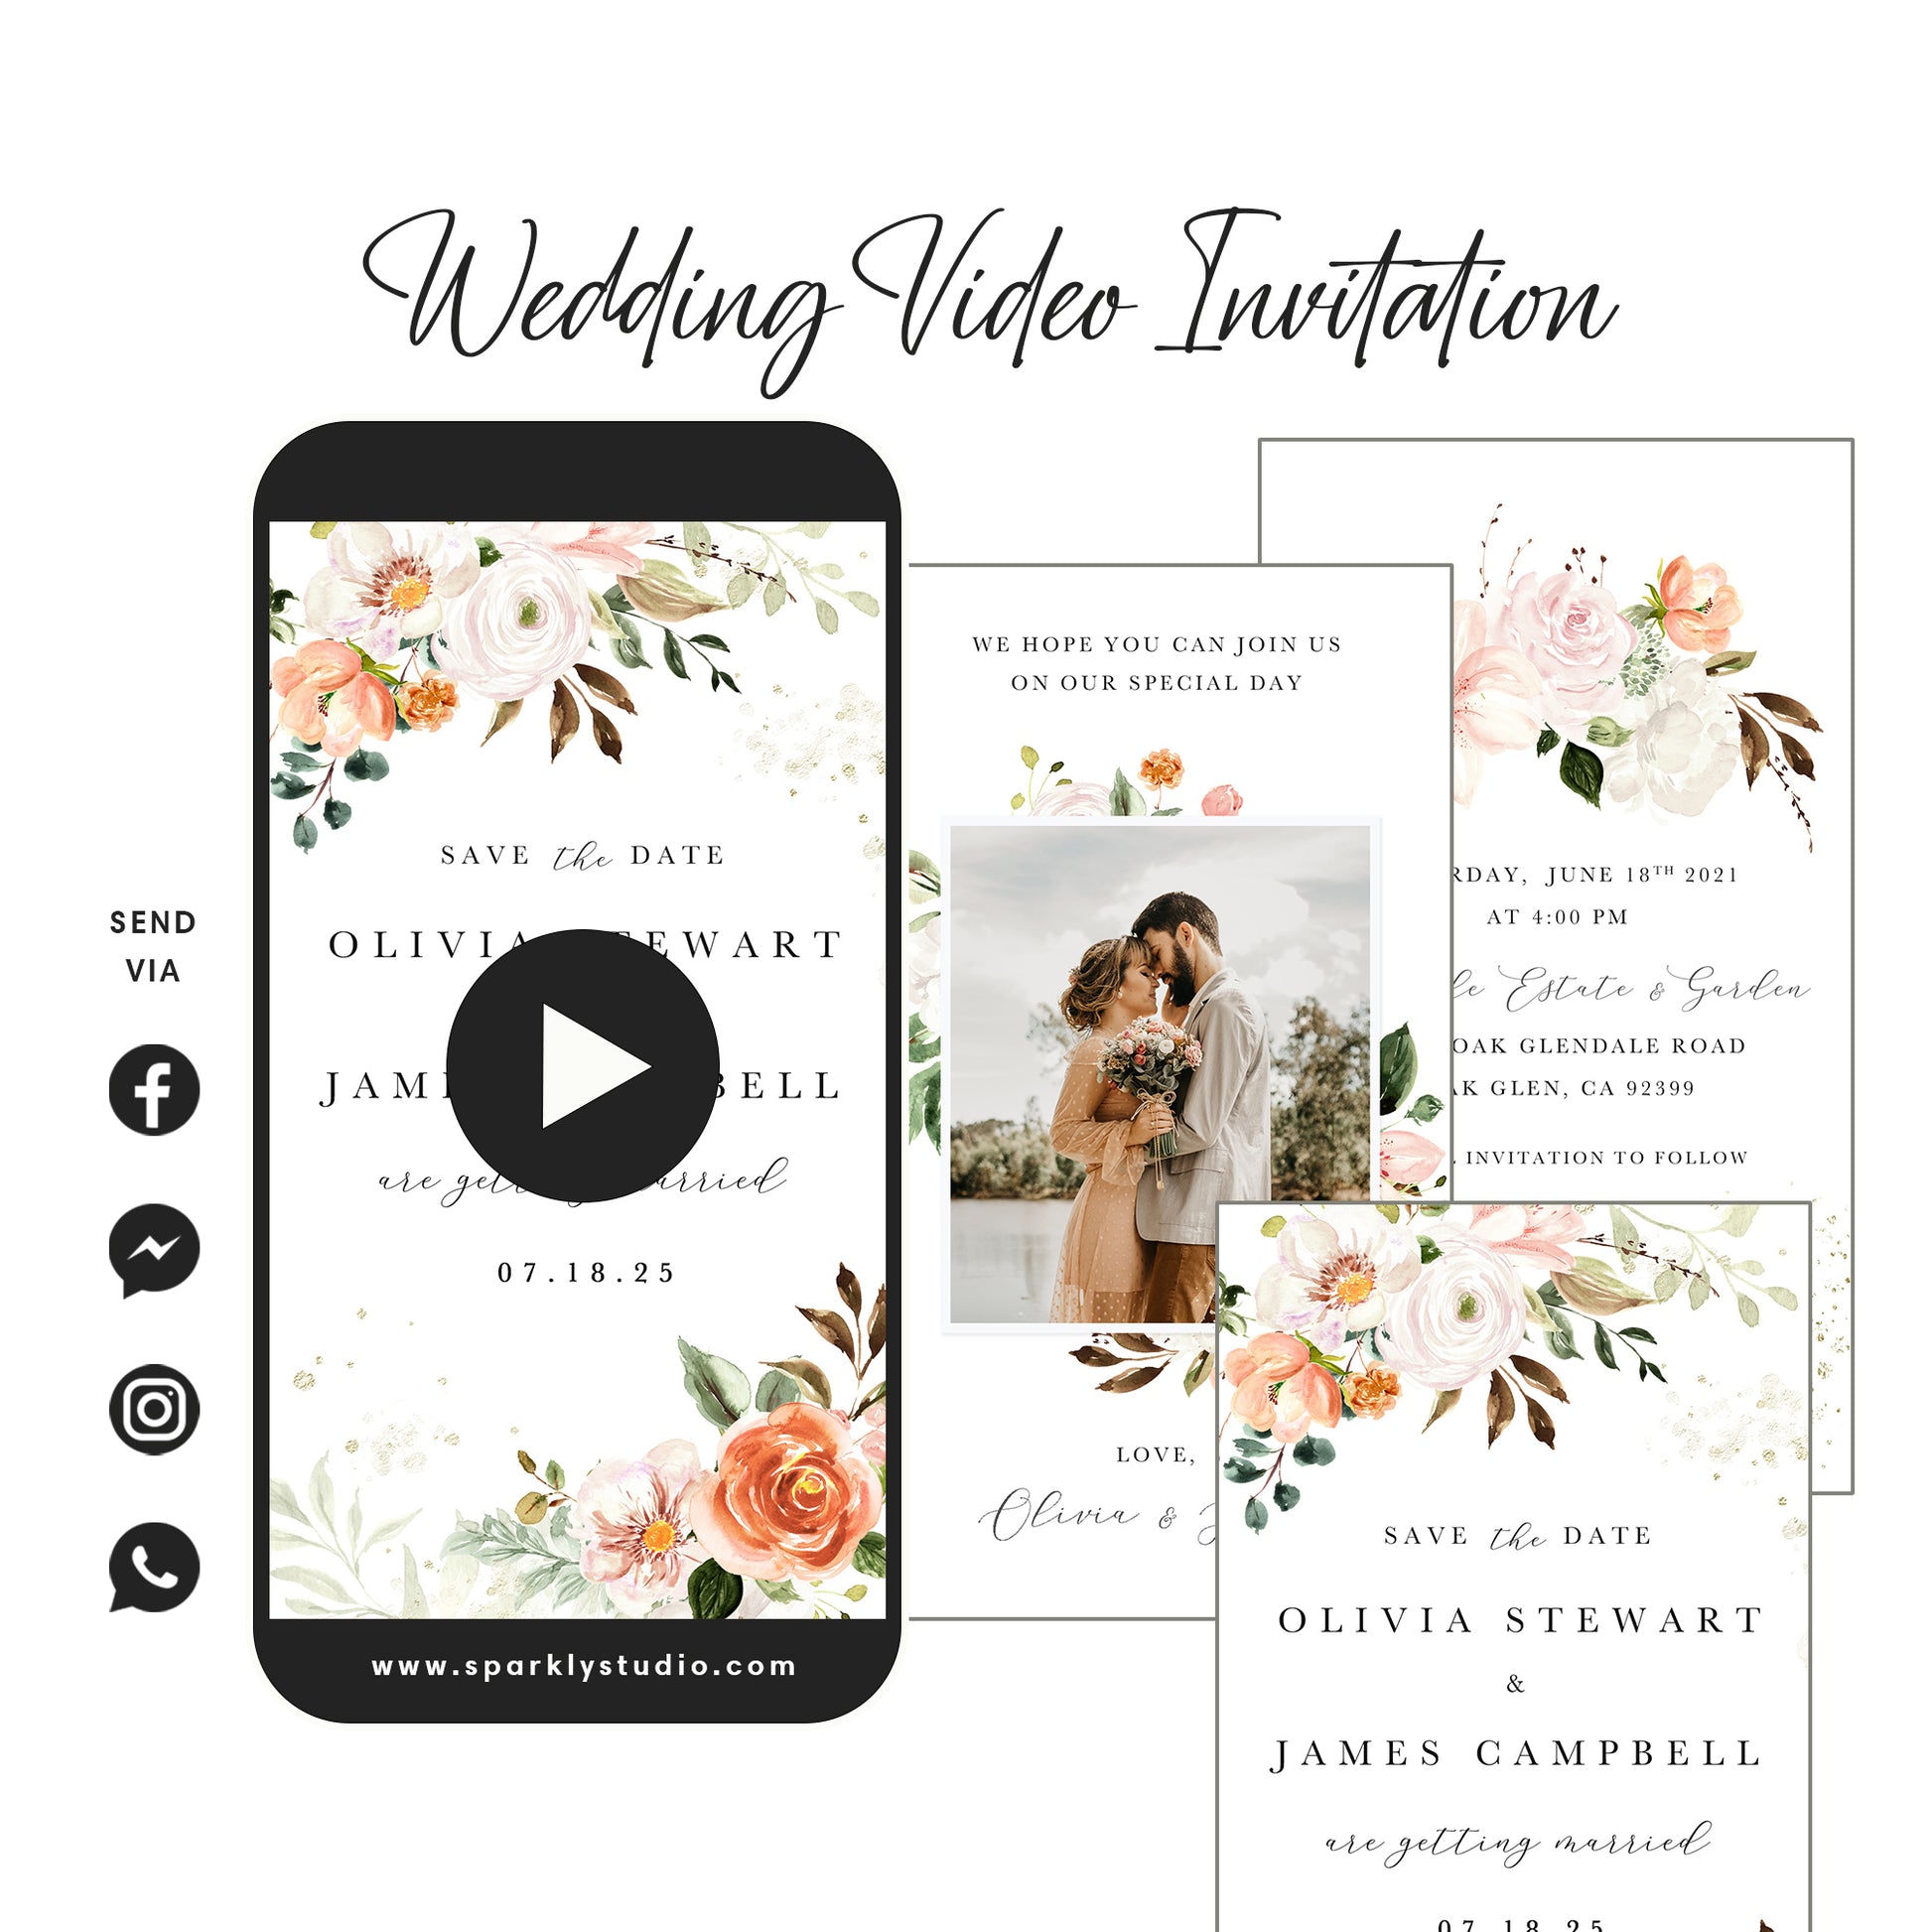 Boho Rustic Floral - Wedding Video Invitation - Save The Date Video